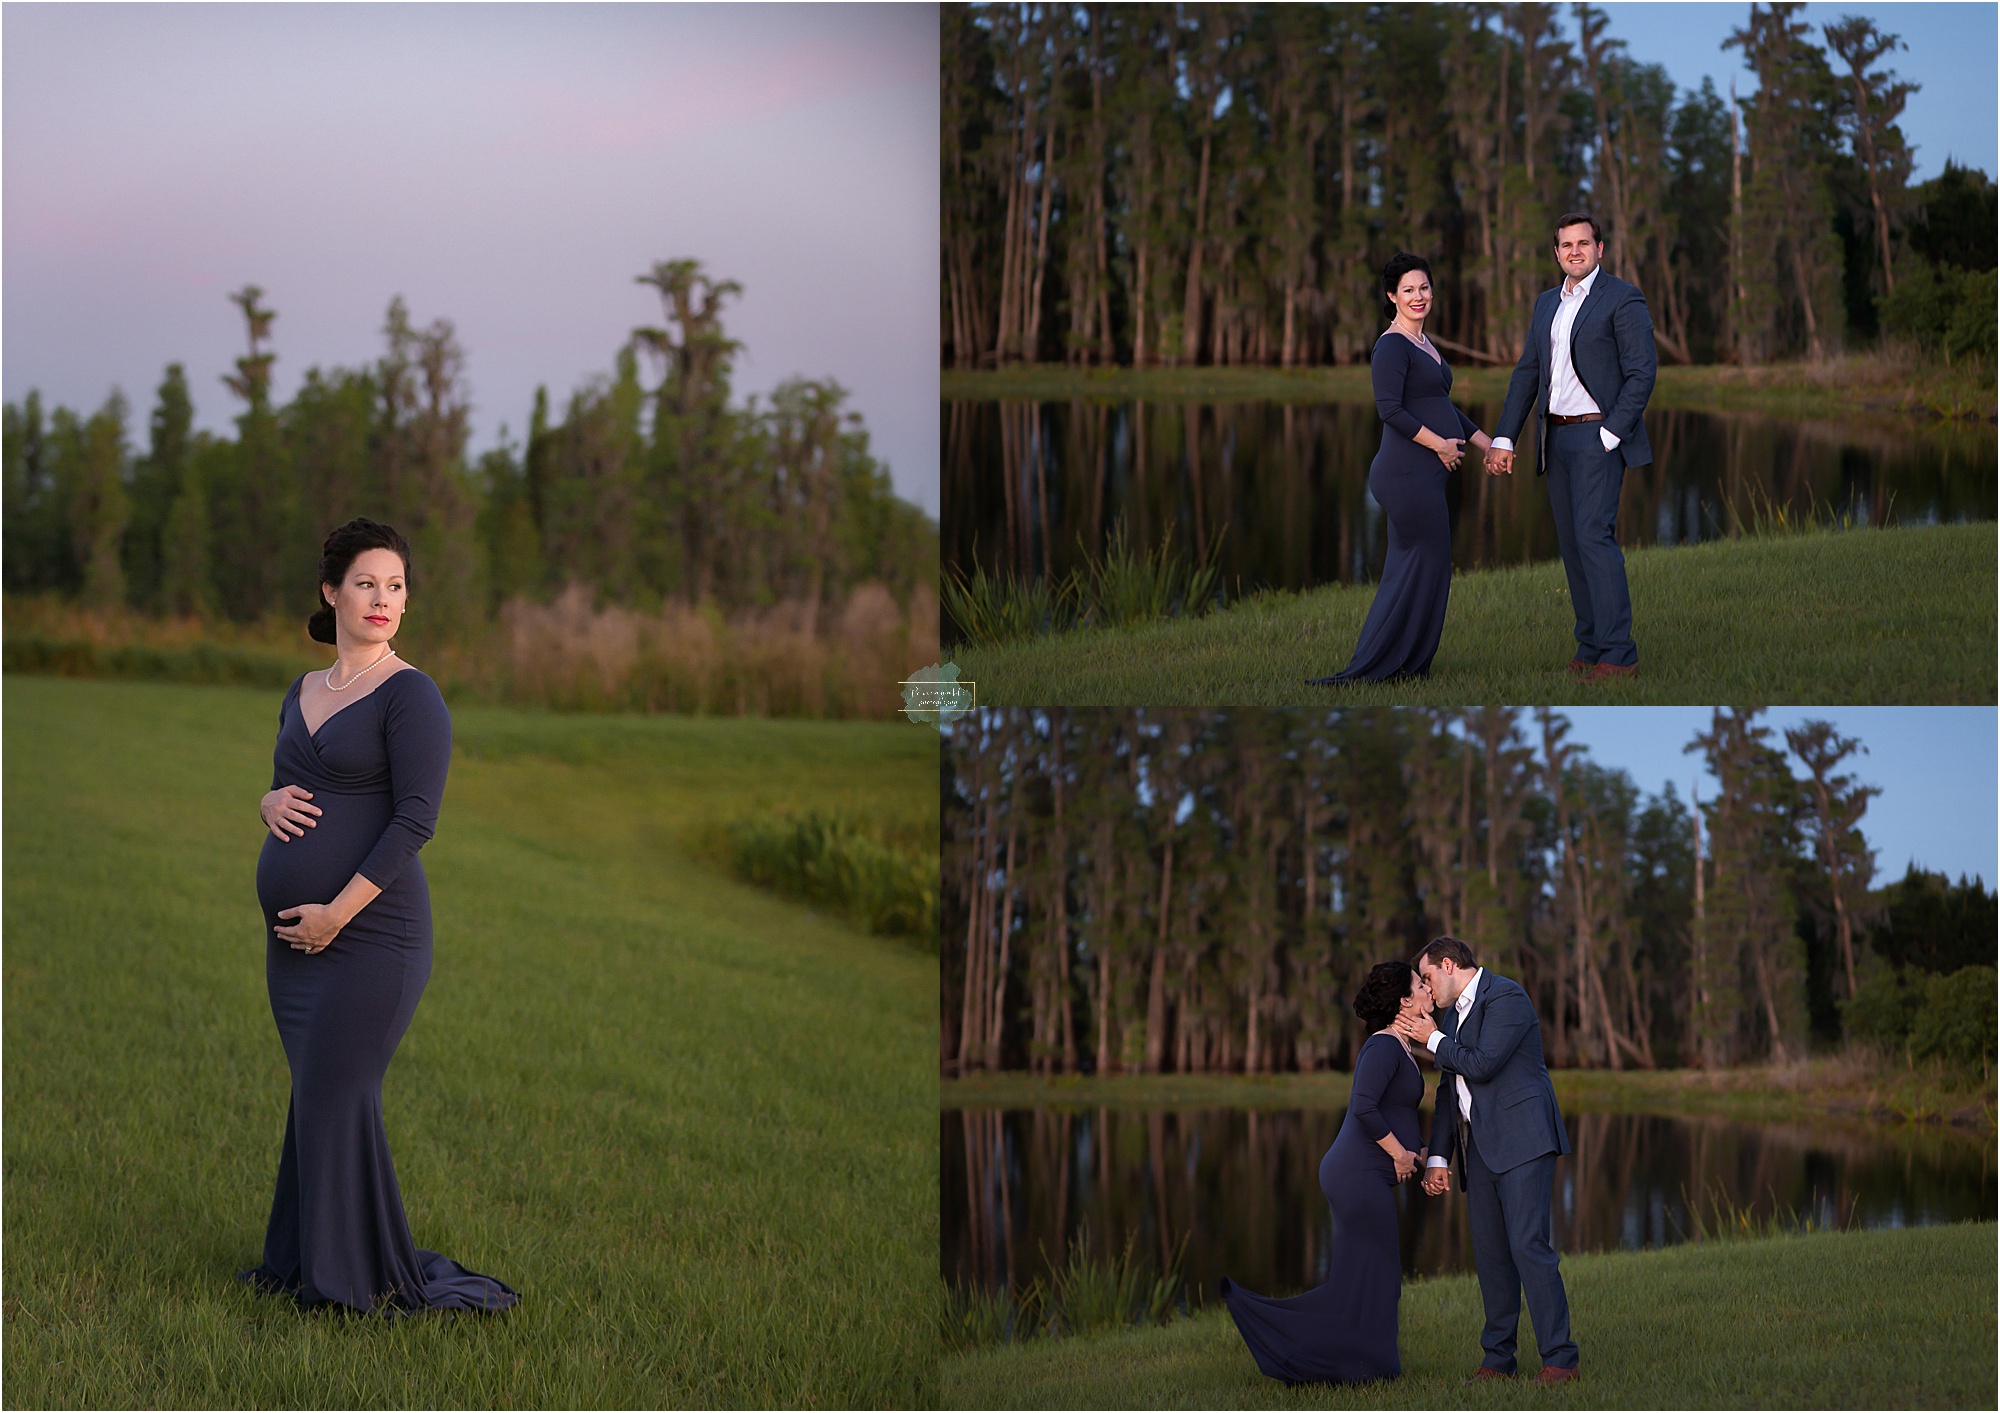 central-florida-formal-maternity photographer